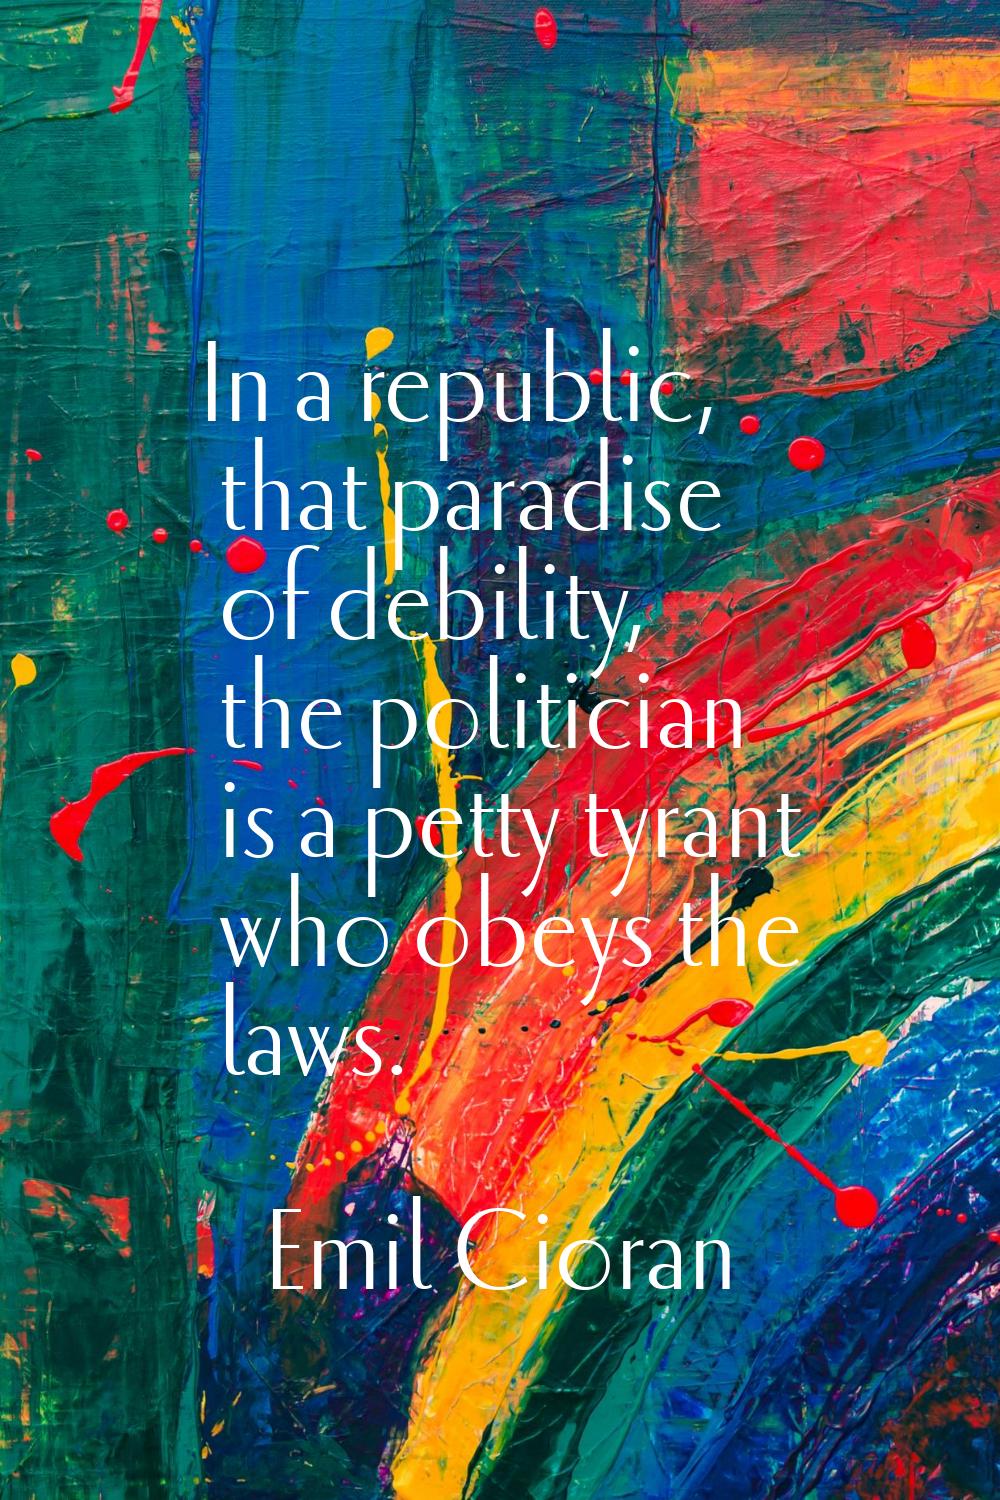 In a republic, that paradise of debility, the politician is a petty tyrant who obeys the laws.